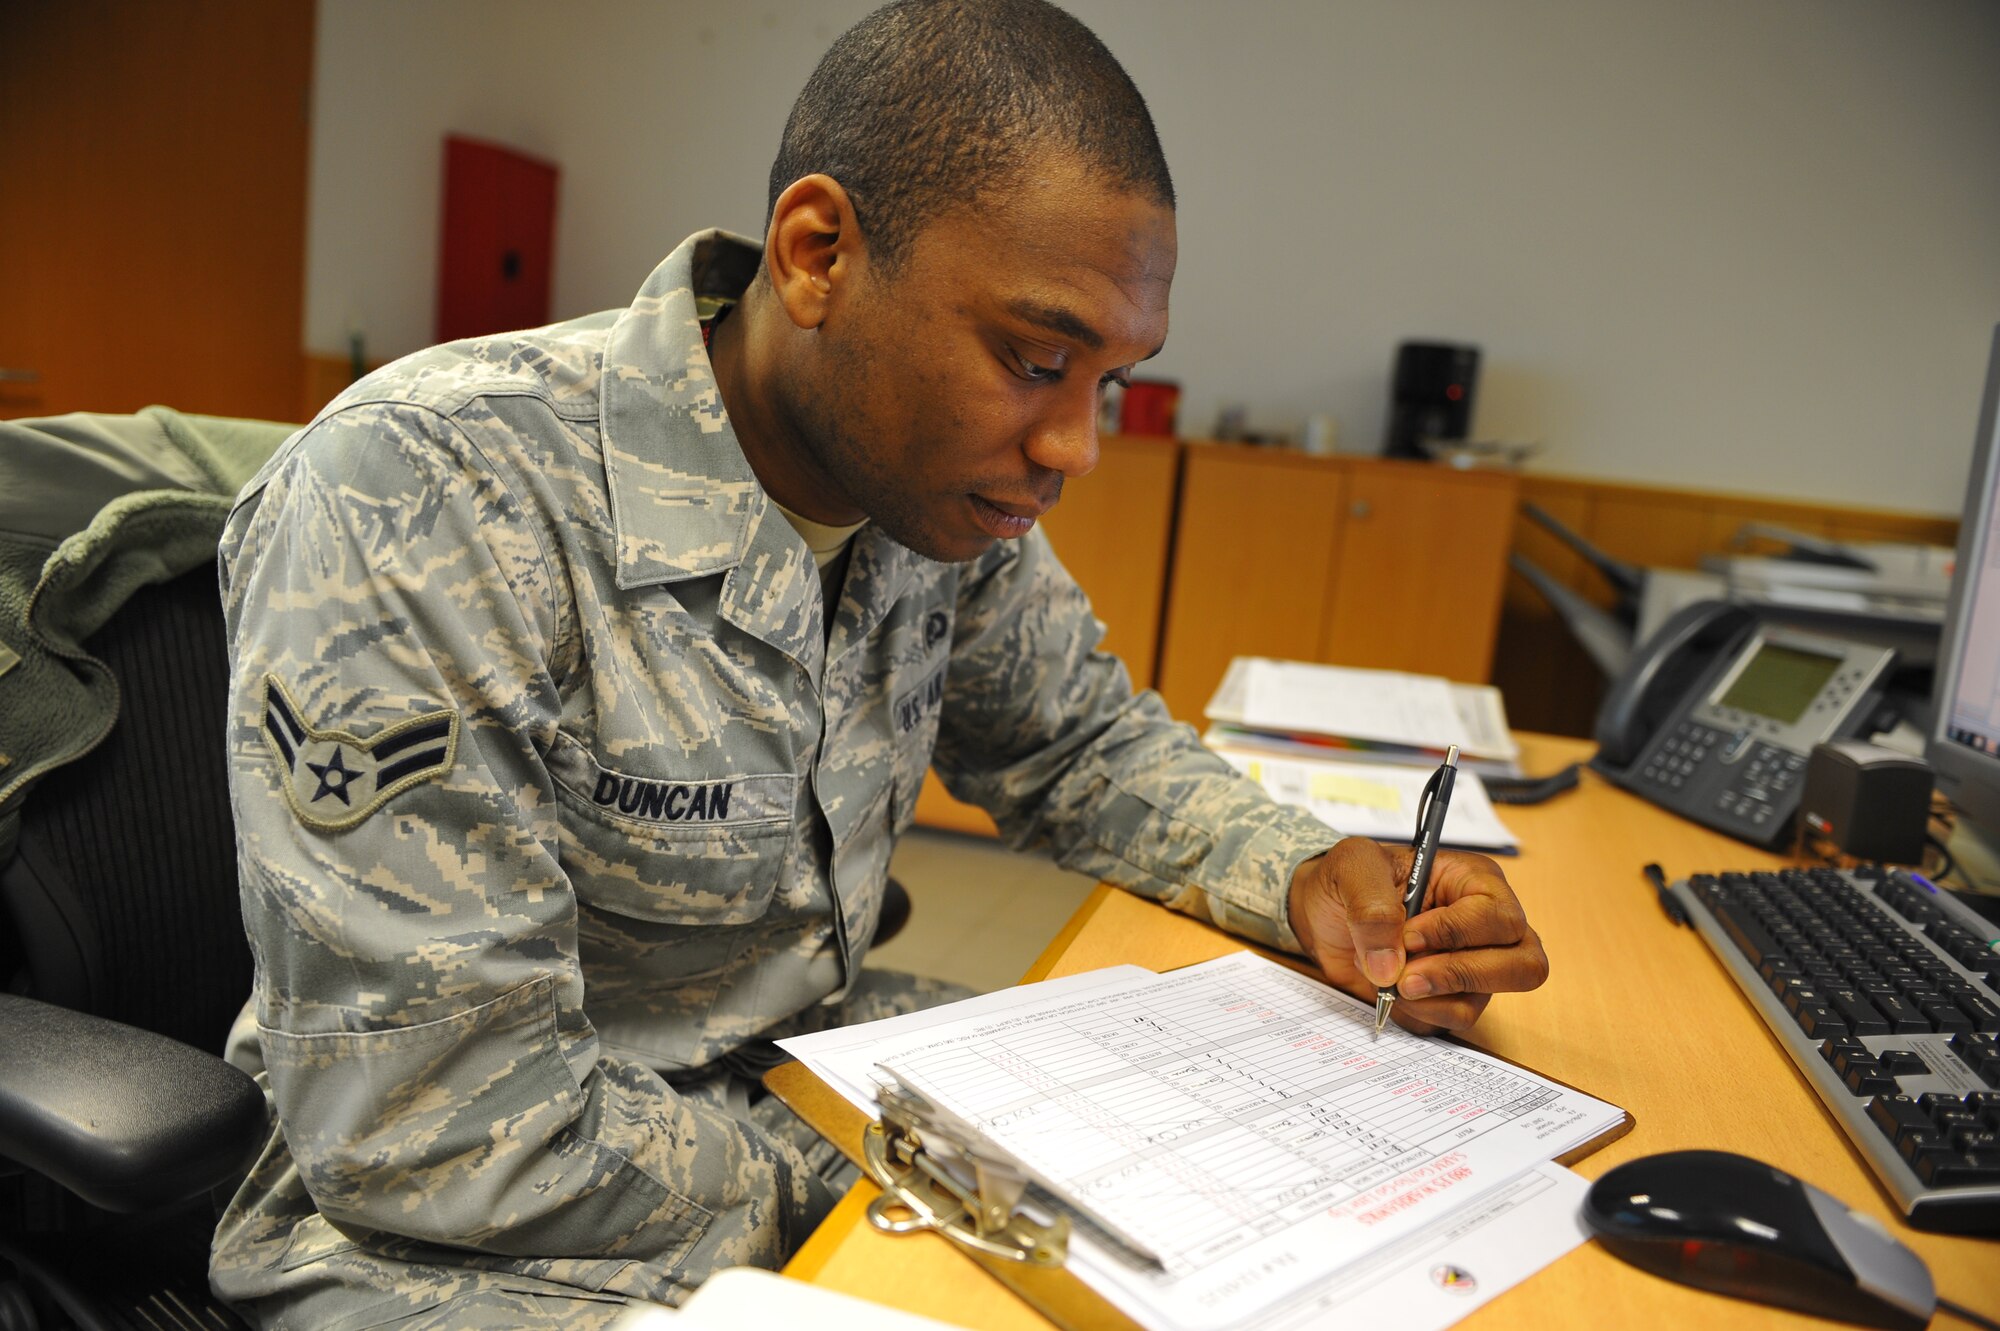 SPANGDAHLEM AIR BASE, Germany – Airman 1st Class Keith Duncan, 480th Fighter Squadron aviation resource management apprentice, verifies a checklist of who will and will not fly before a pre-flight briefing inside Bldg. 108 here Feb. 21. Twelve Airmen work at the squadron’s operations desk and are responsible for coordinating with base operations, weather operations and aircraft maintenance to ensure flight operations run smoothly. The operations desk is also responsible for gathering and organizing flight information to help log flight hours and brief pilots before, during and after flights. (U.S. Air Force photo by Airman 1st Class Dillon Davis/Released)